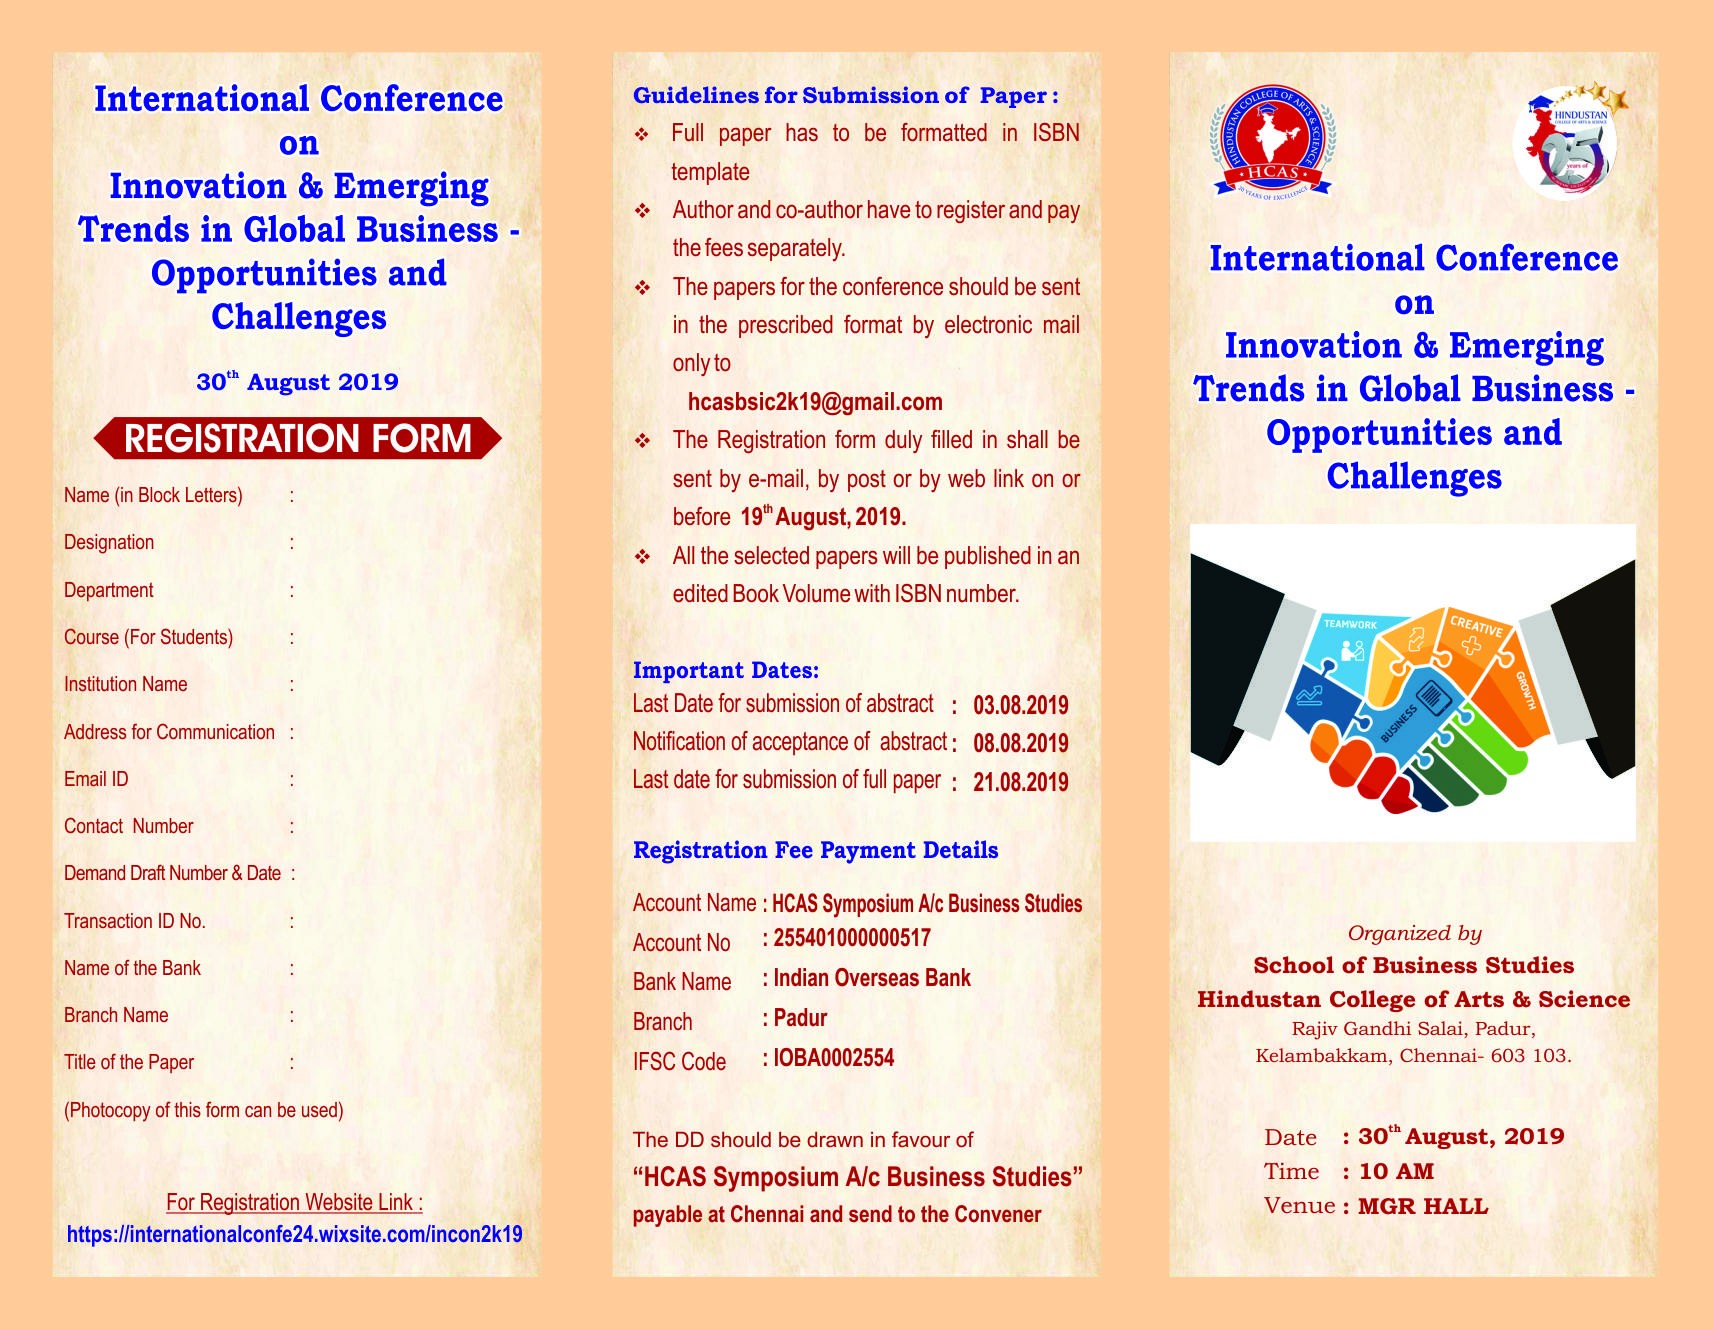 International-Conference-by-School-of-Business-Studies